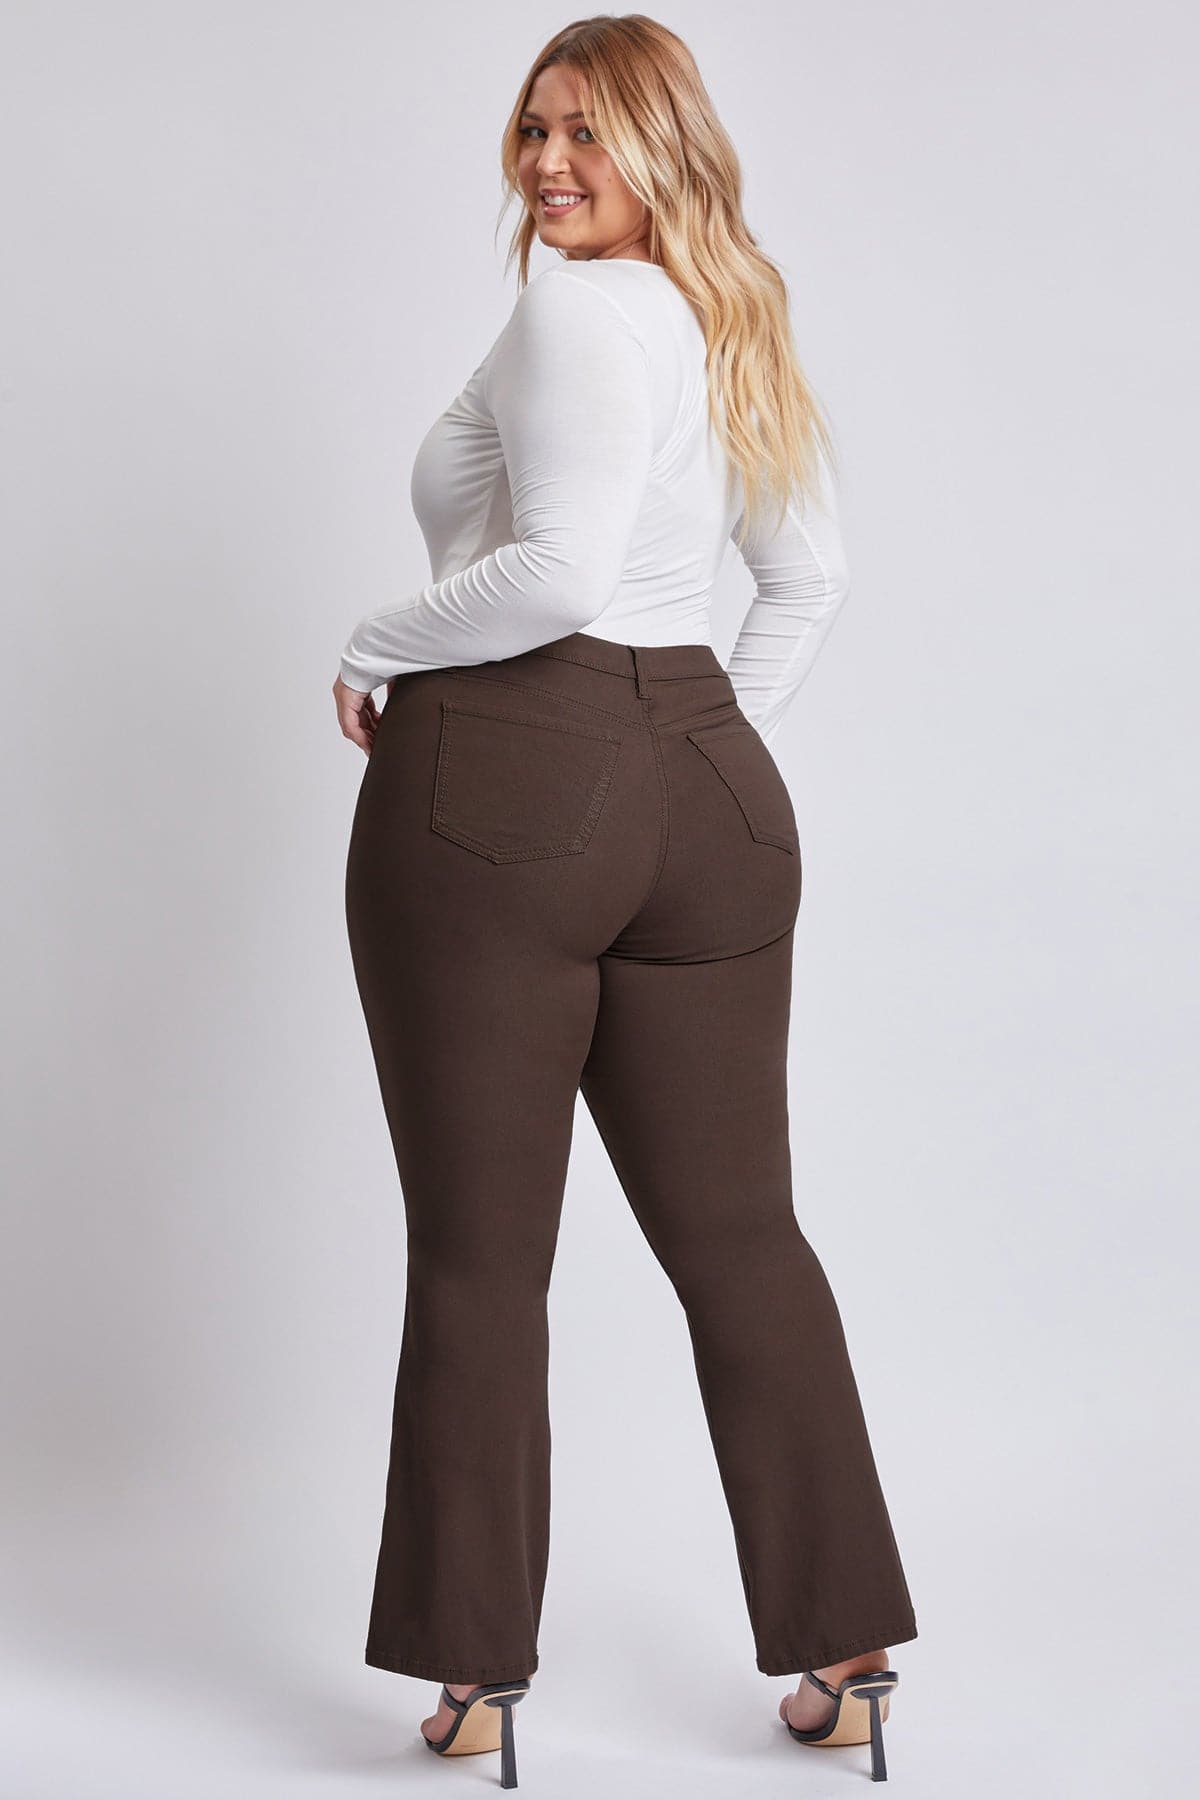 Plus Size Women's Hyperstretch Forever Color Flare Pants